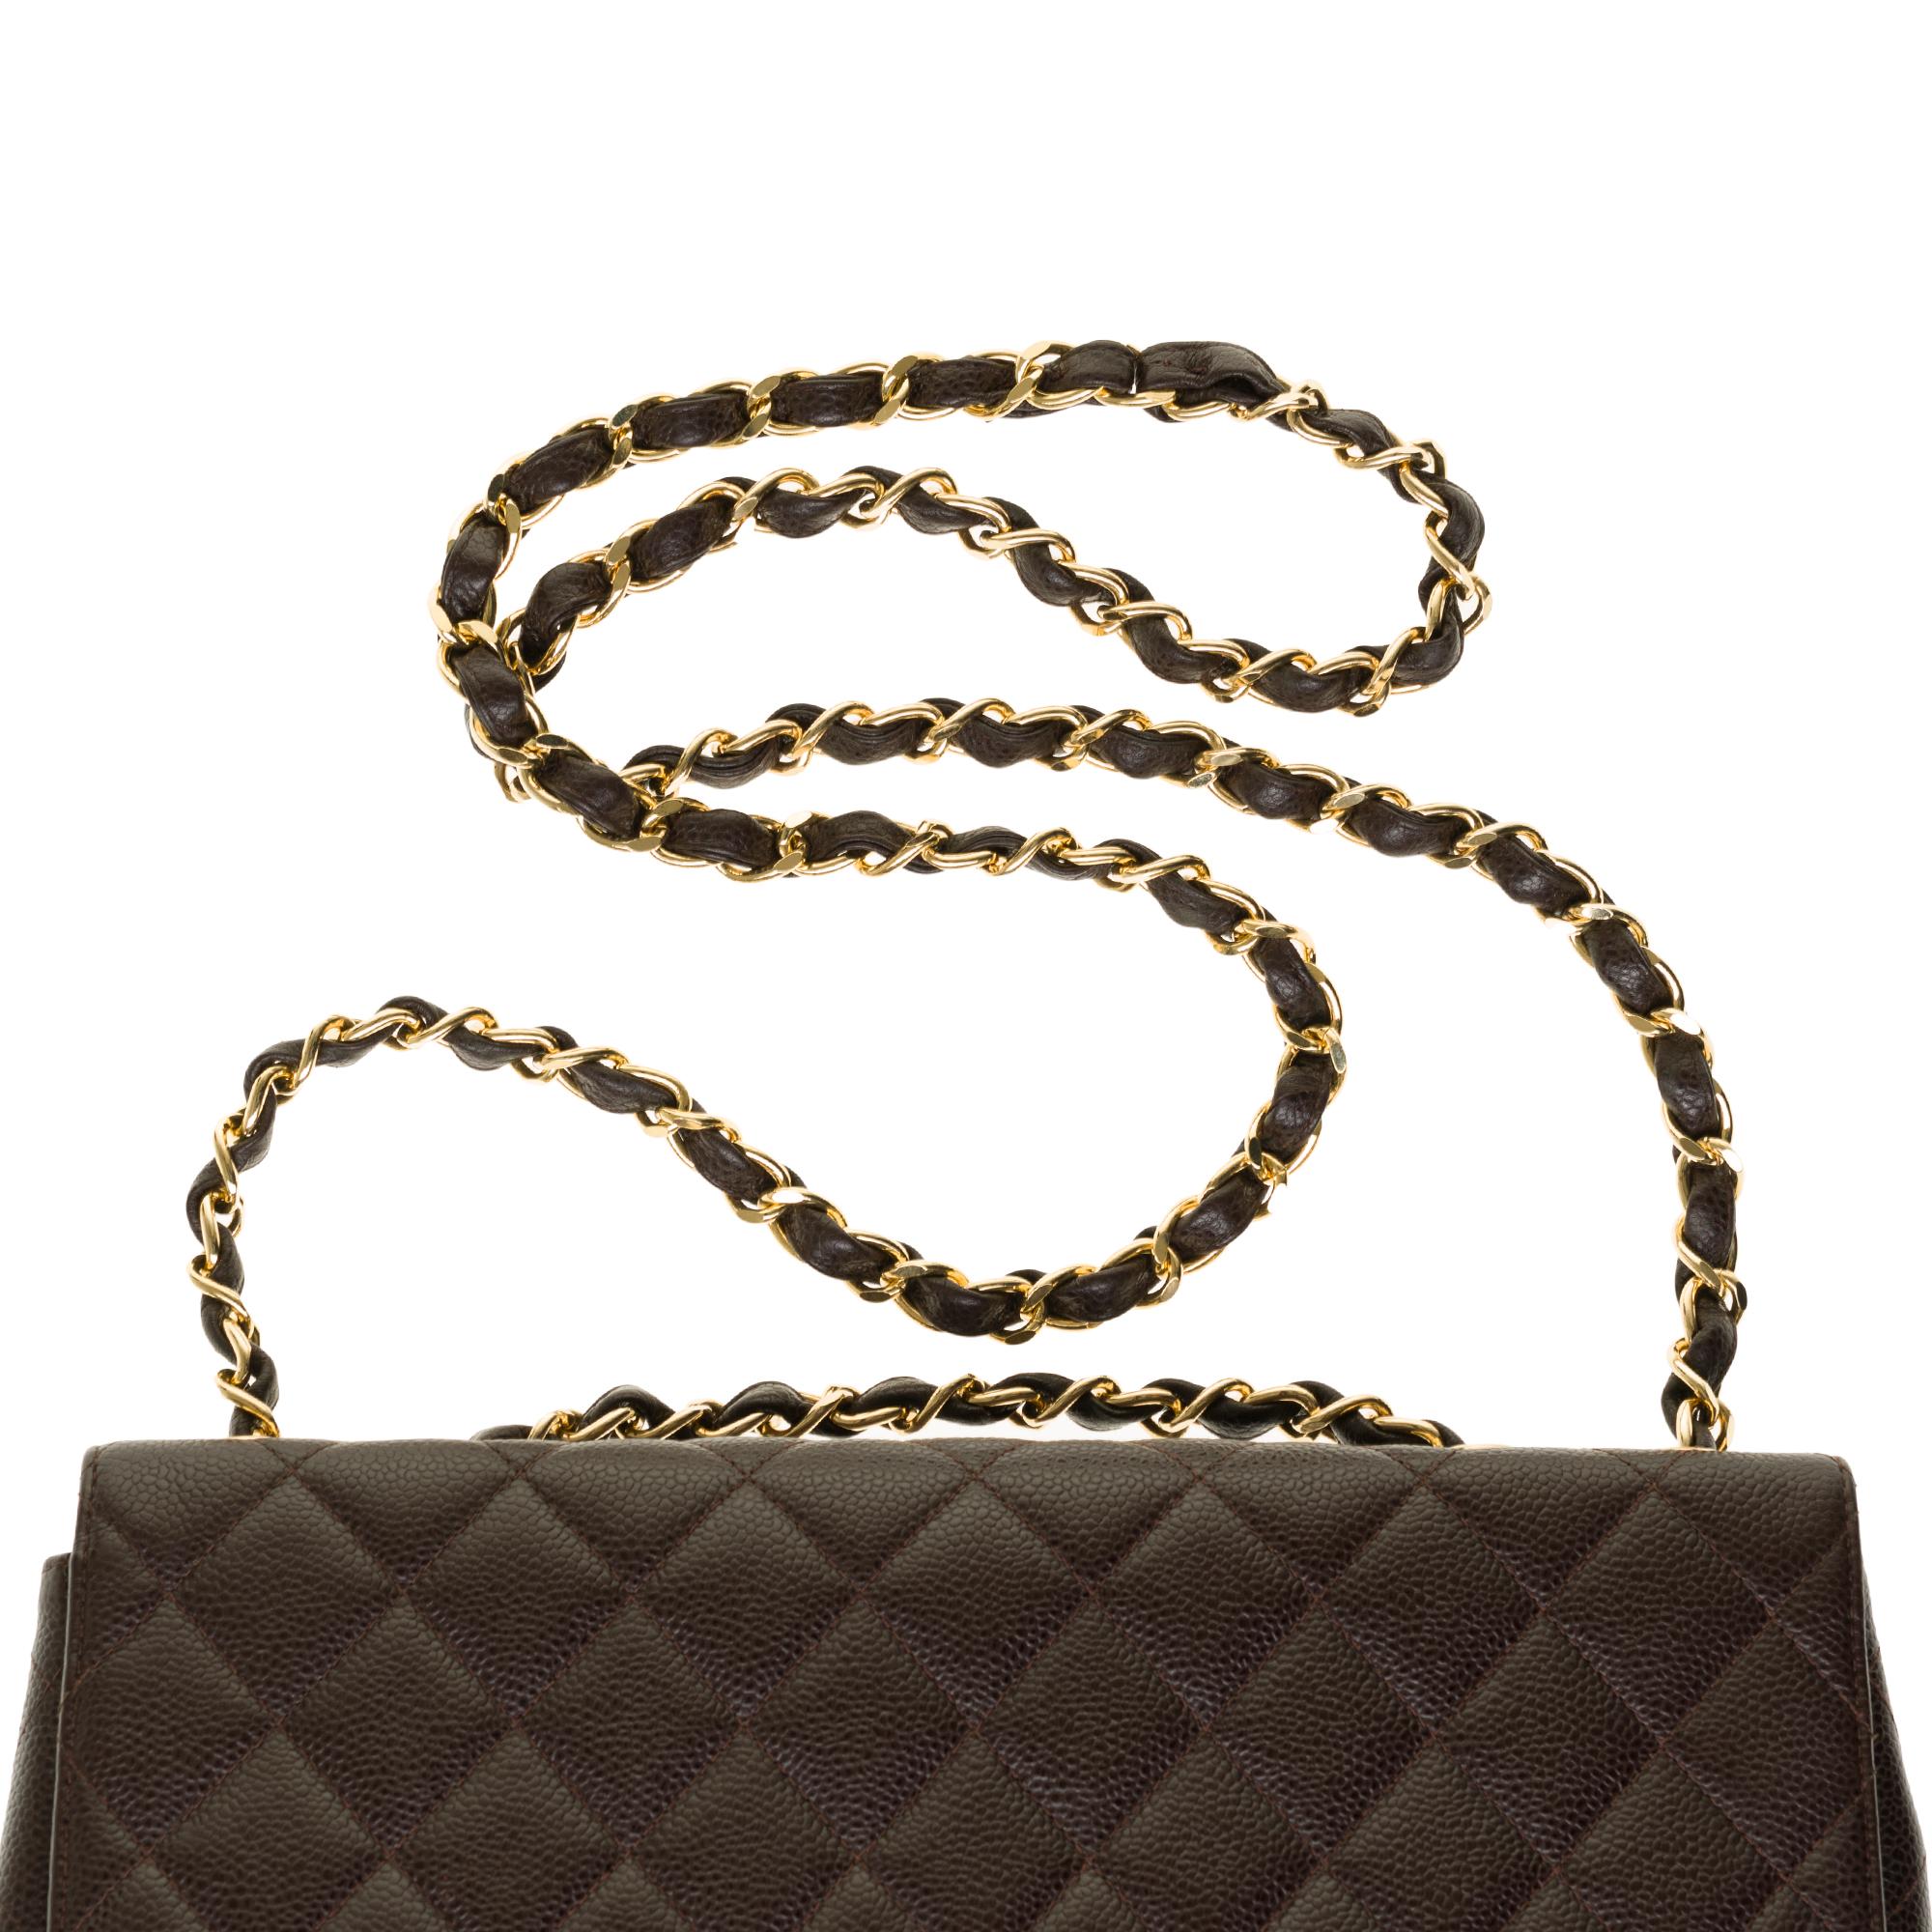 Chanel Timeless Jumbo single flap handbag in brown quilted caviar leather, GHW 4